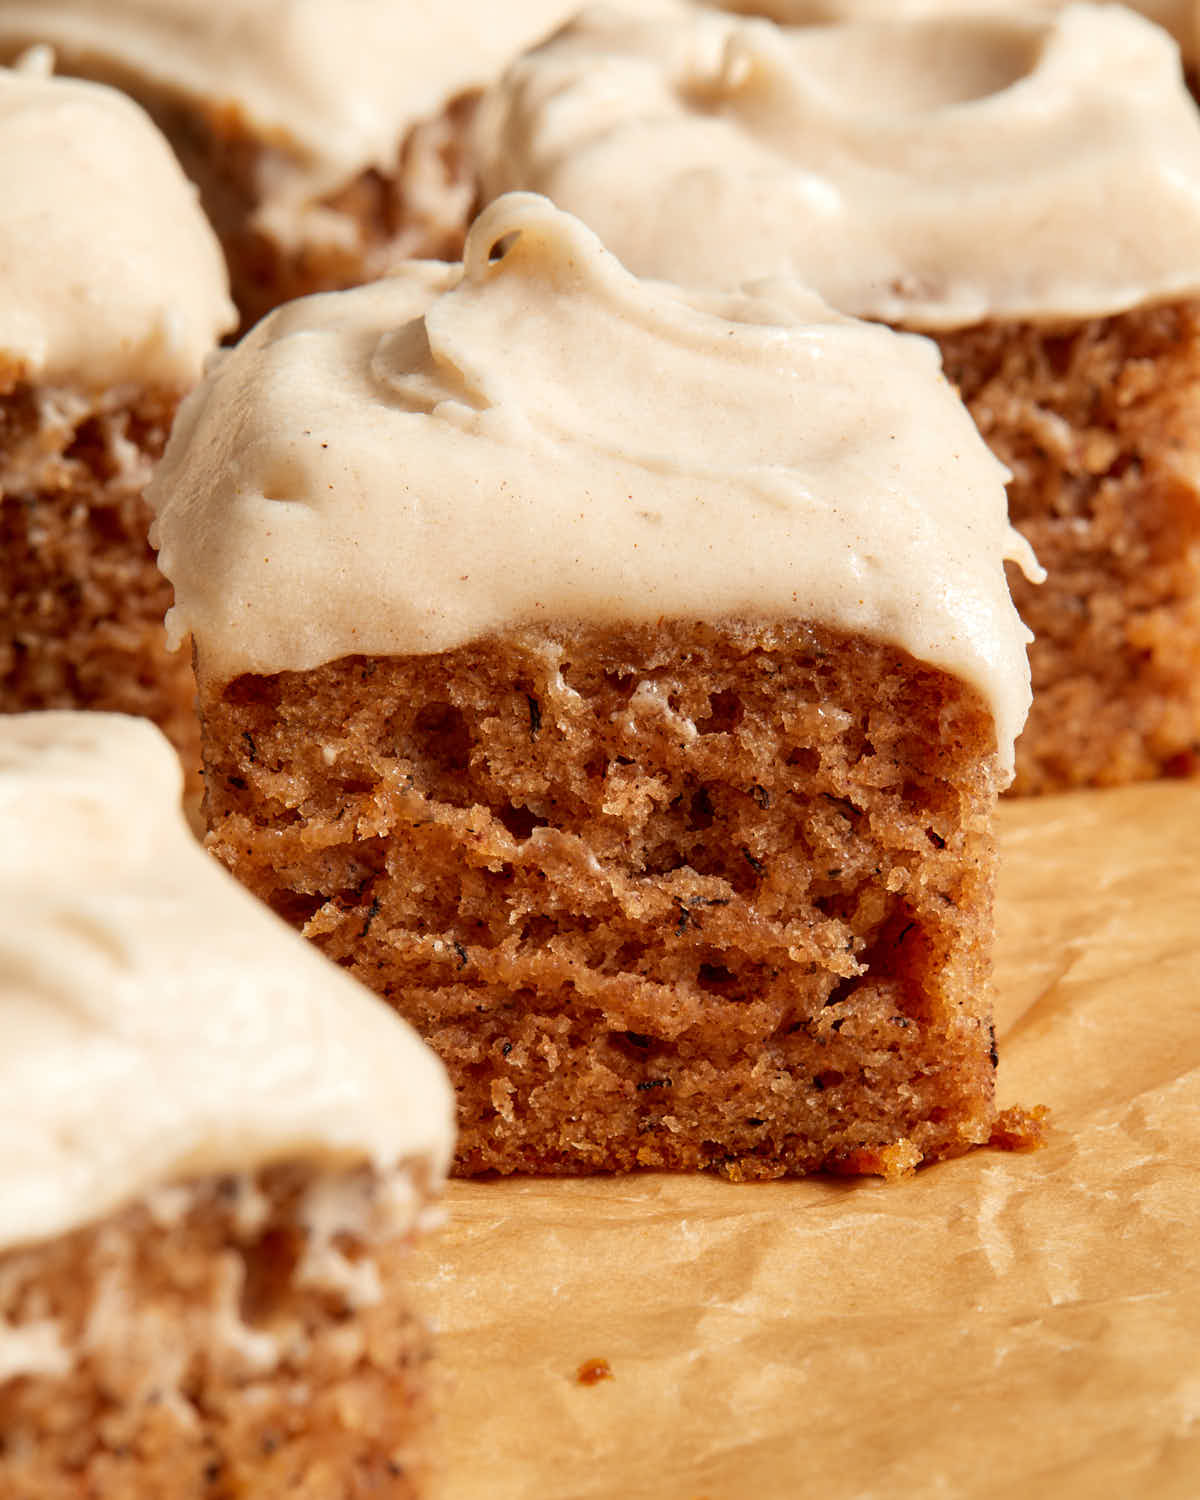 Side view of pieces of banana cake topped with frosting.